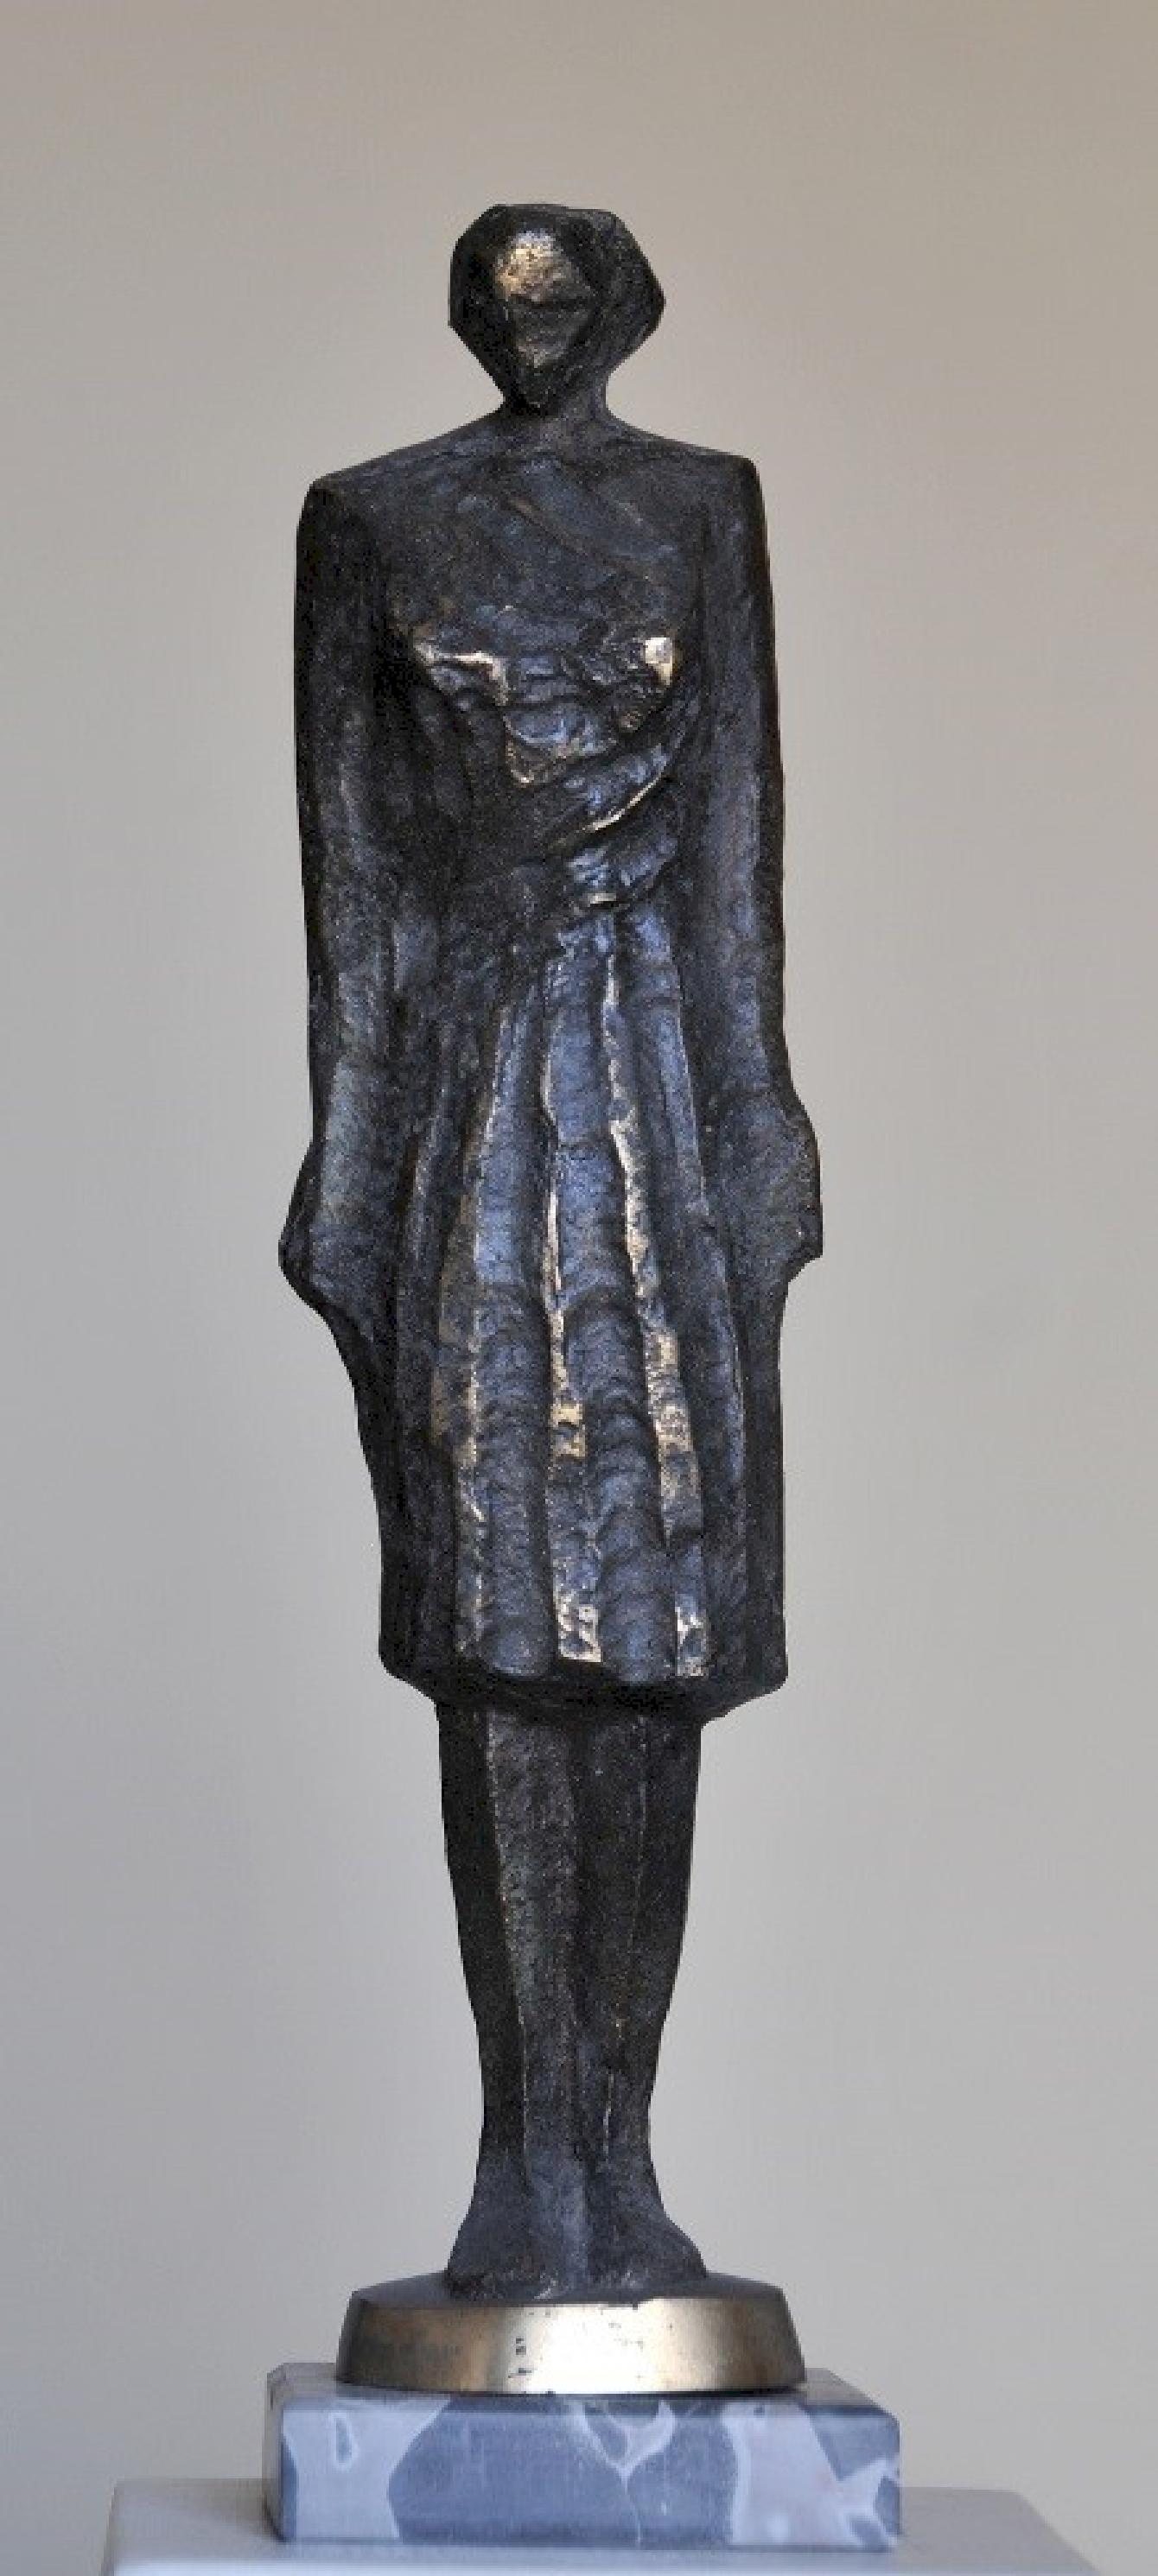 "Soldier" Bronze Sculpture 20" x 5" x 3.5" inch by Sarkis Tossonian

Sarkis Tossoonian was born in Alexandria in 1953. He graduated from the Faculty of Fine Arts/Sculpture in 1979. He started exhibiting in individual and group exhibitions in